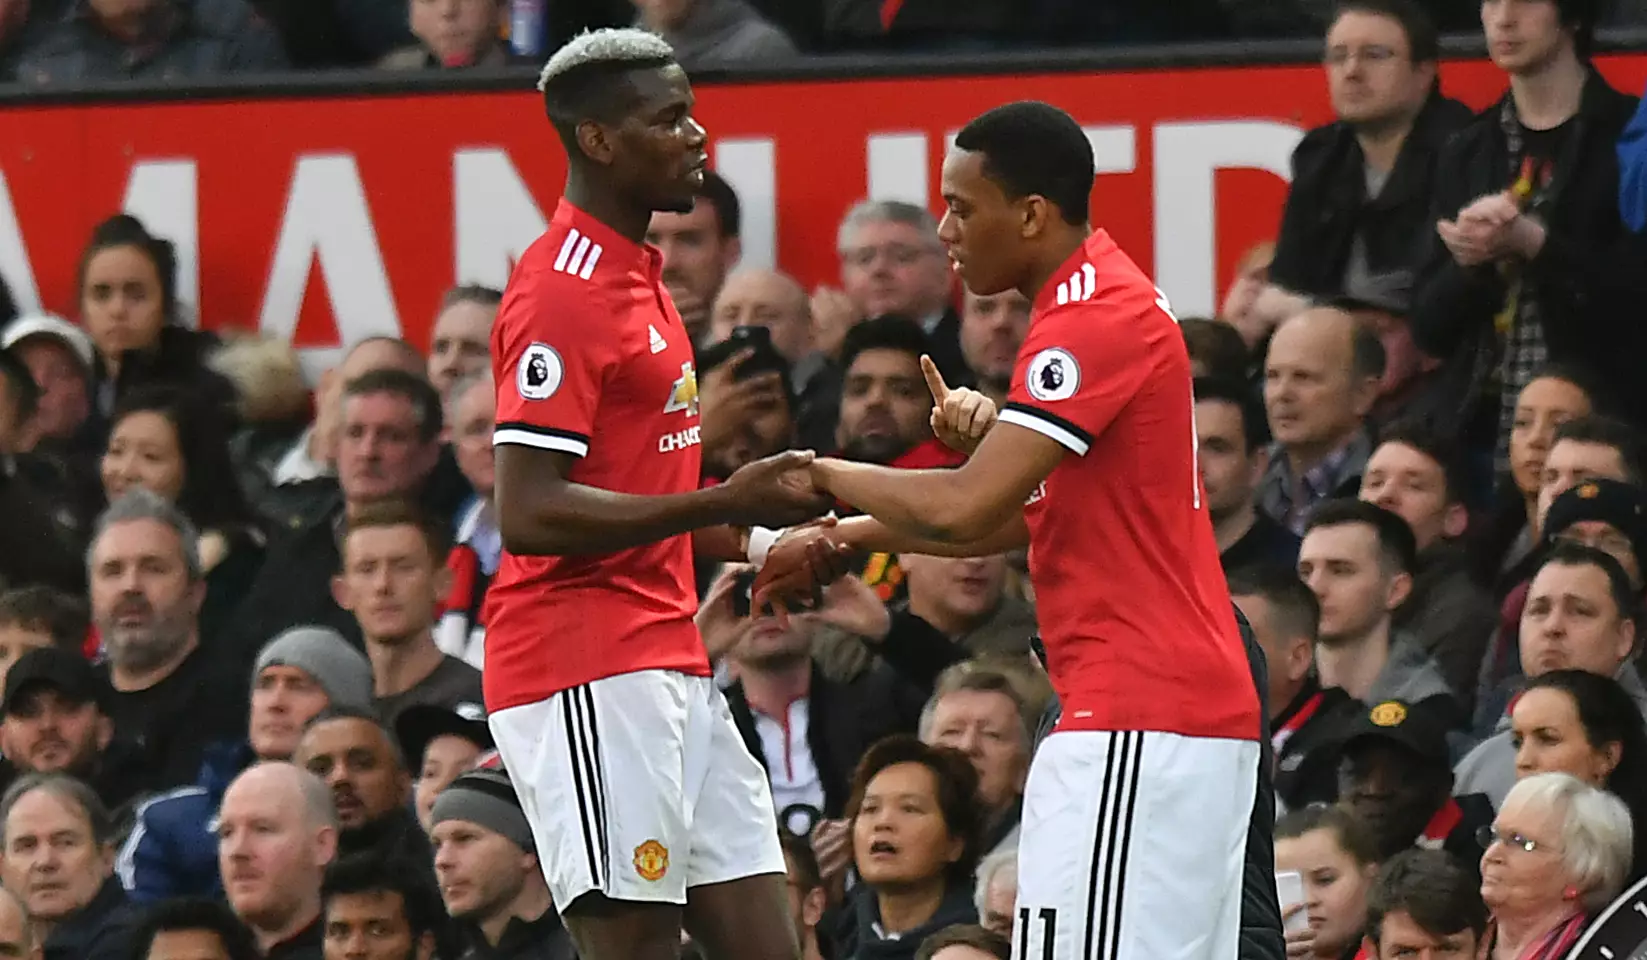 Martial replaced Pogba on Saturday. Image: PA Images